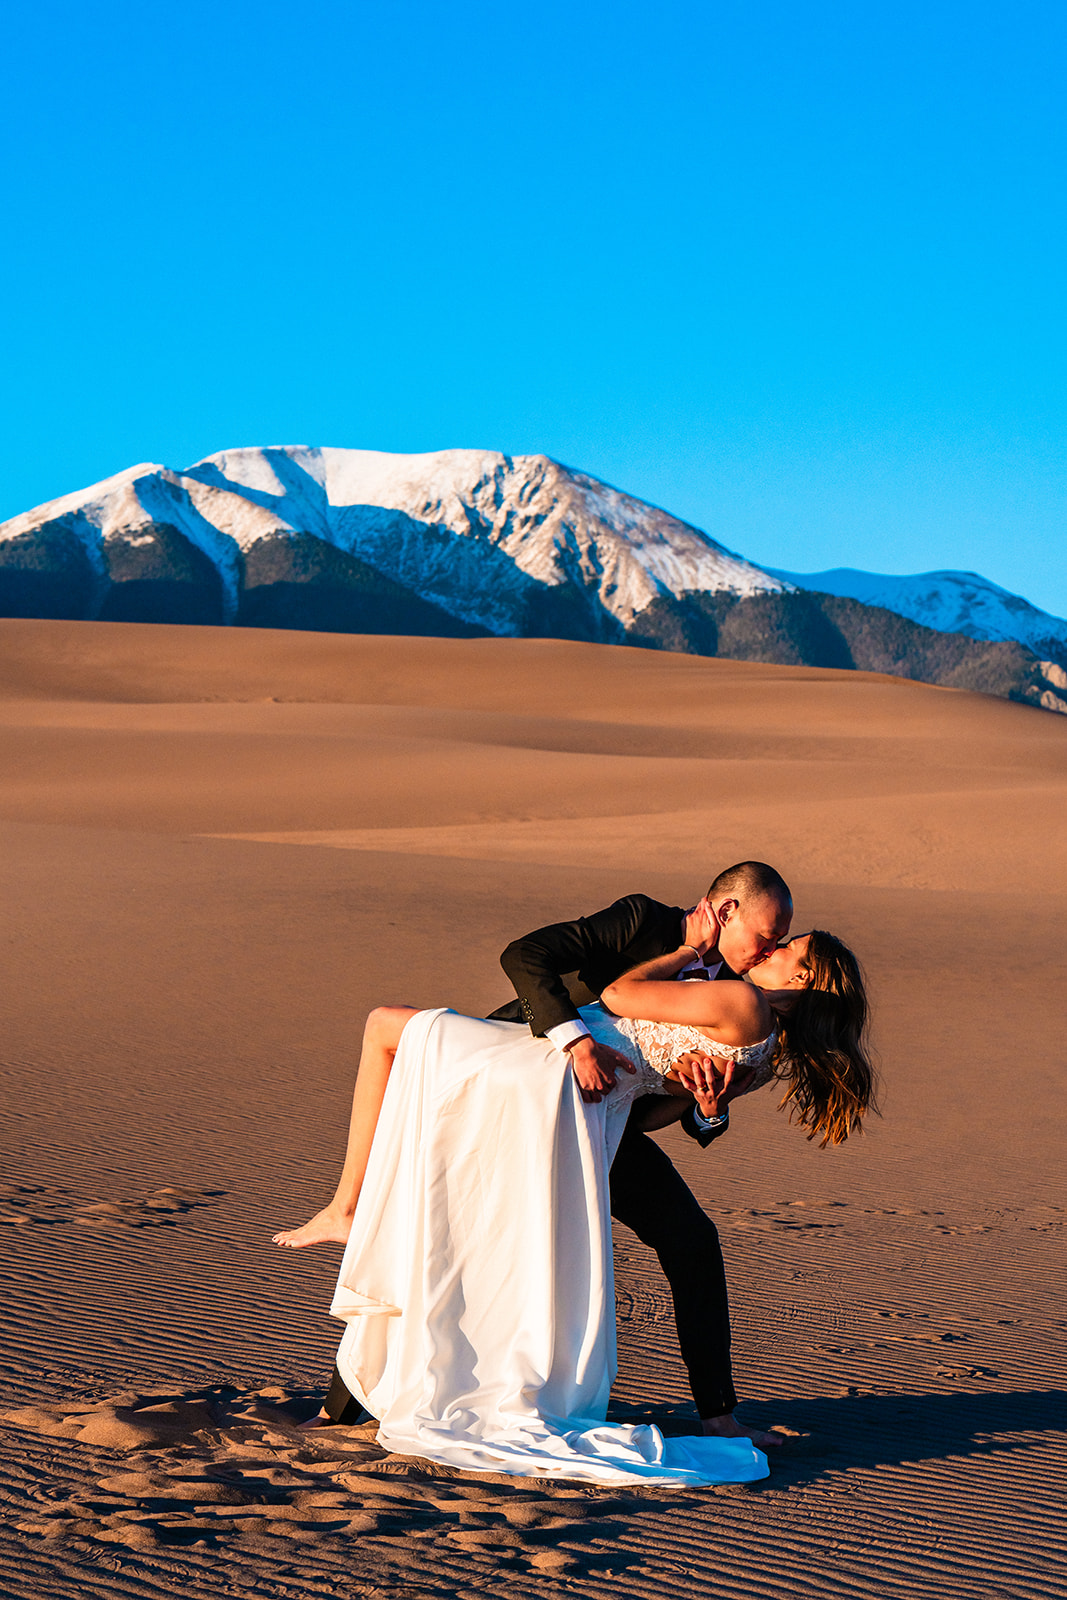 A man and woman kissing in the desert at the Great Sand Dunes